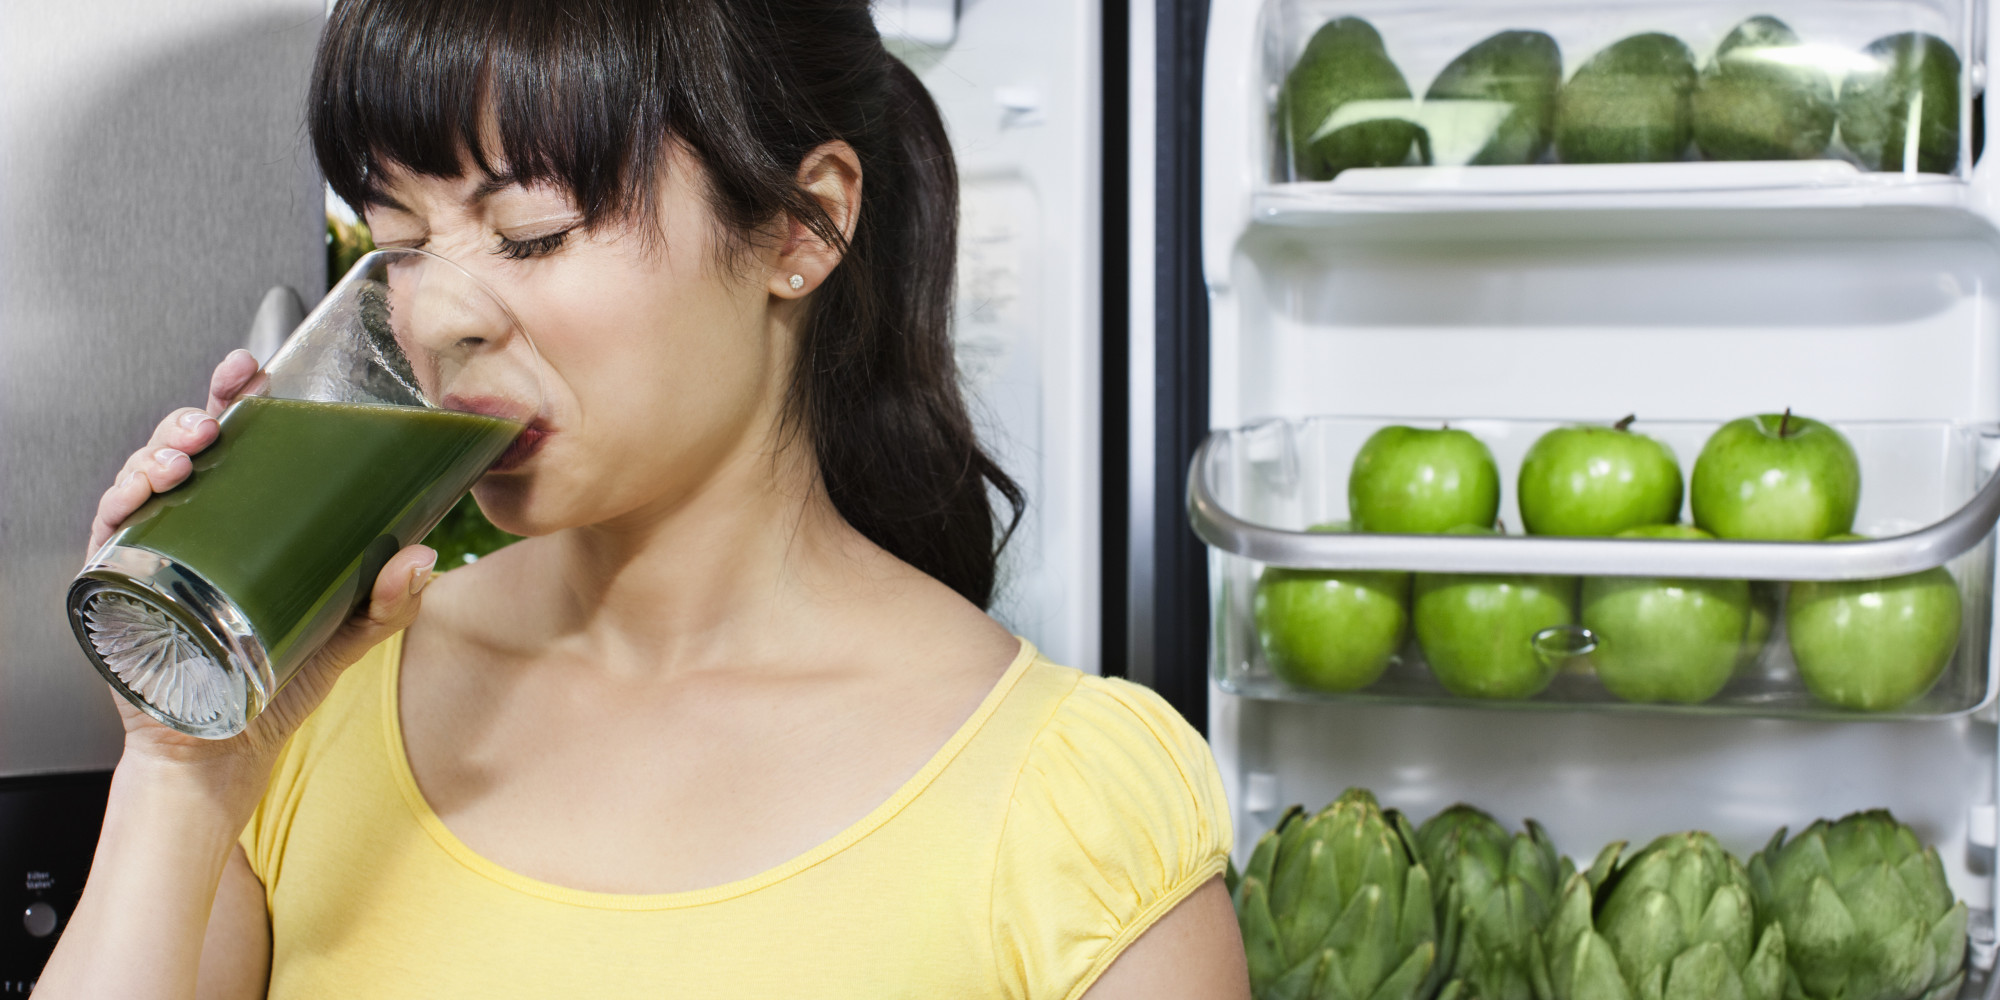 When does 'Clean Eating' Become an Unhealthy Obsession?